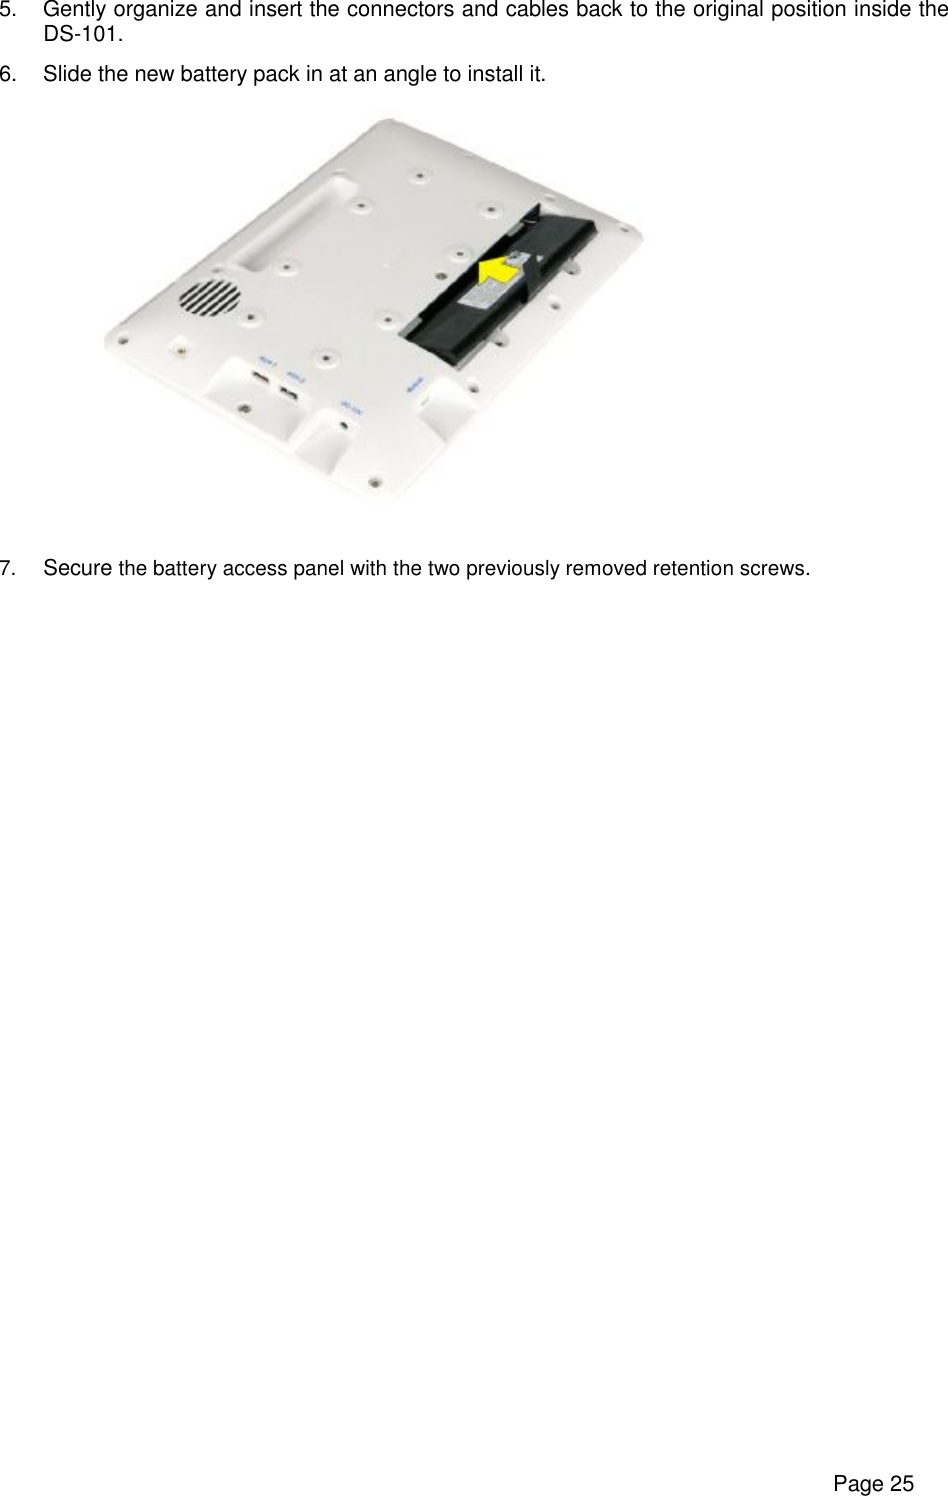      Page 25 5. Gently organize and insert the connectors and cables back to the original position inside the DS-101.  6. Slide the new battery pack in at an angle to install it.    7.  Secure the battery access panel with the two previously removed retention screws.    